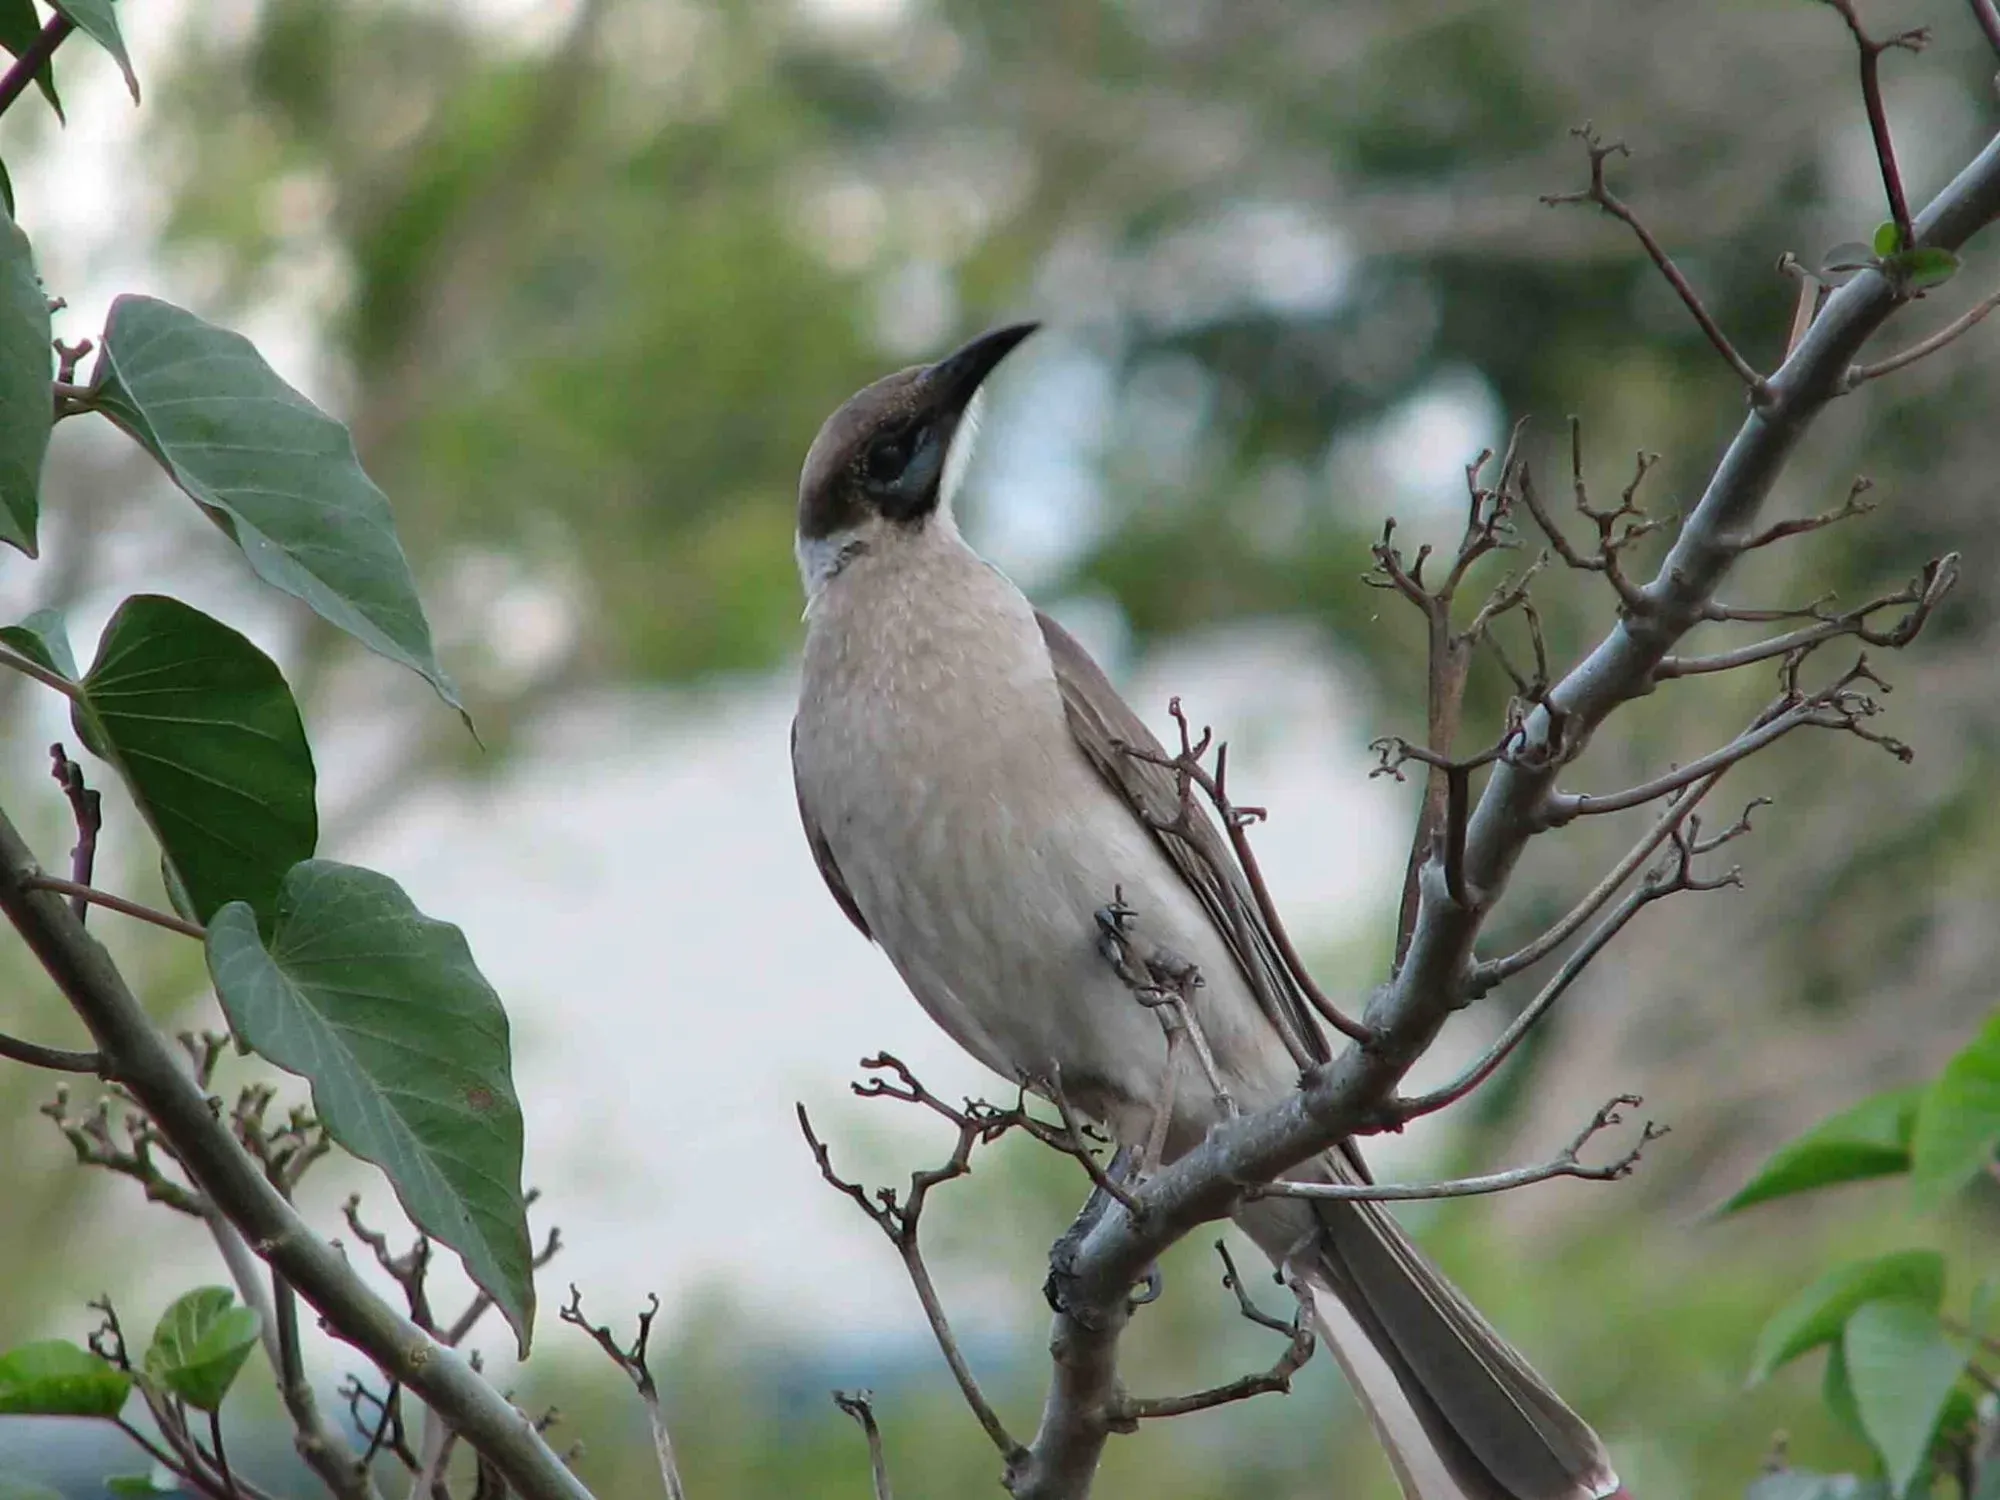 The little friarbird has a brown-gray body with a bare blue face.